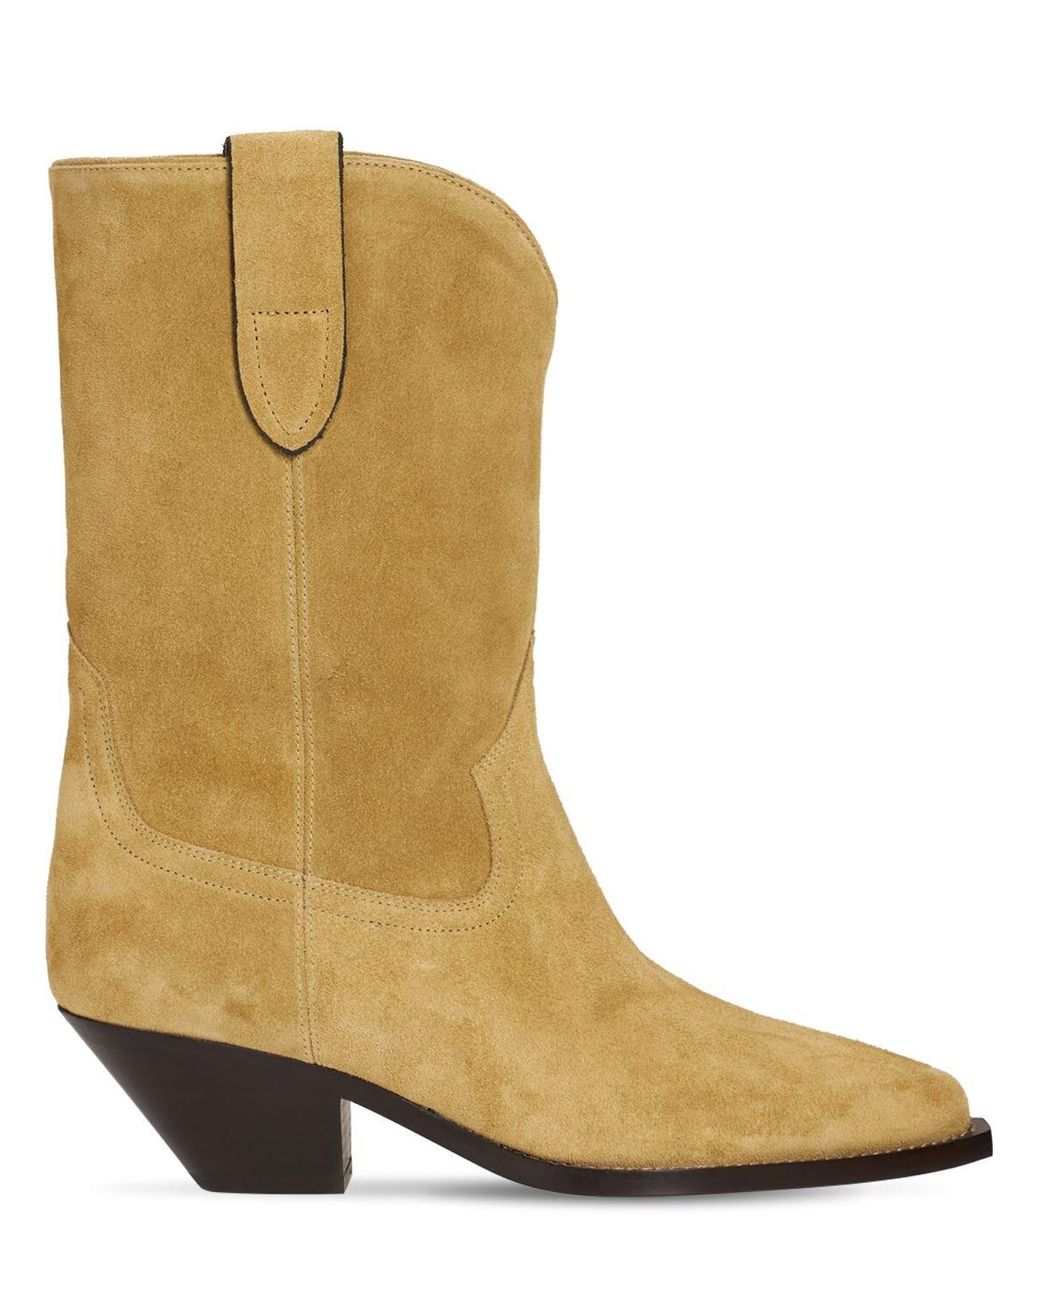 Isabel Marant 45mm Dahope Suede Ankle Boots in Natural | Lyst